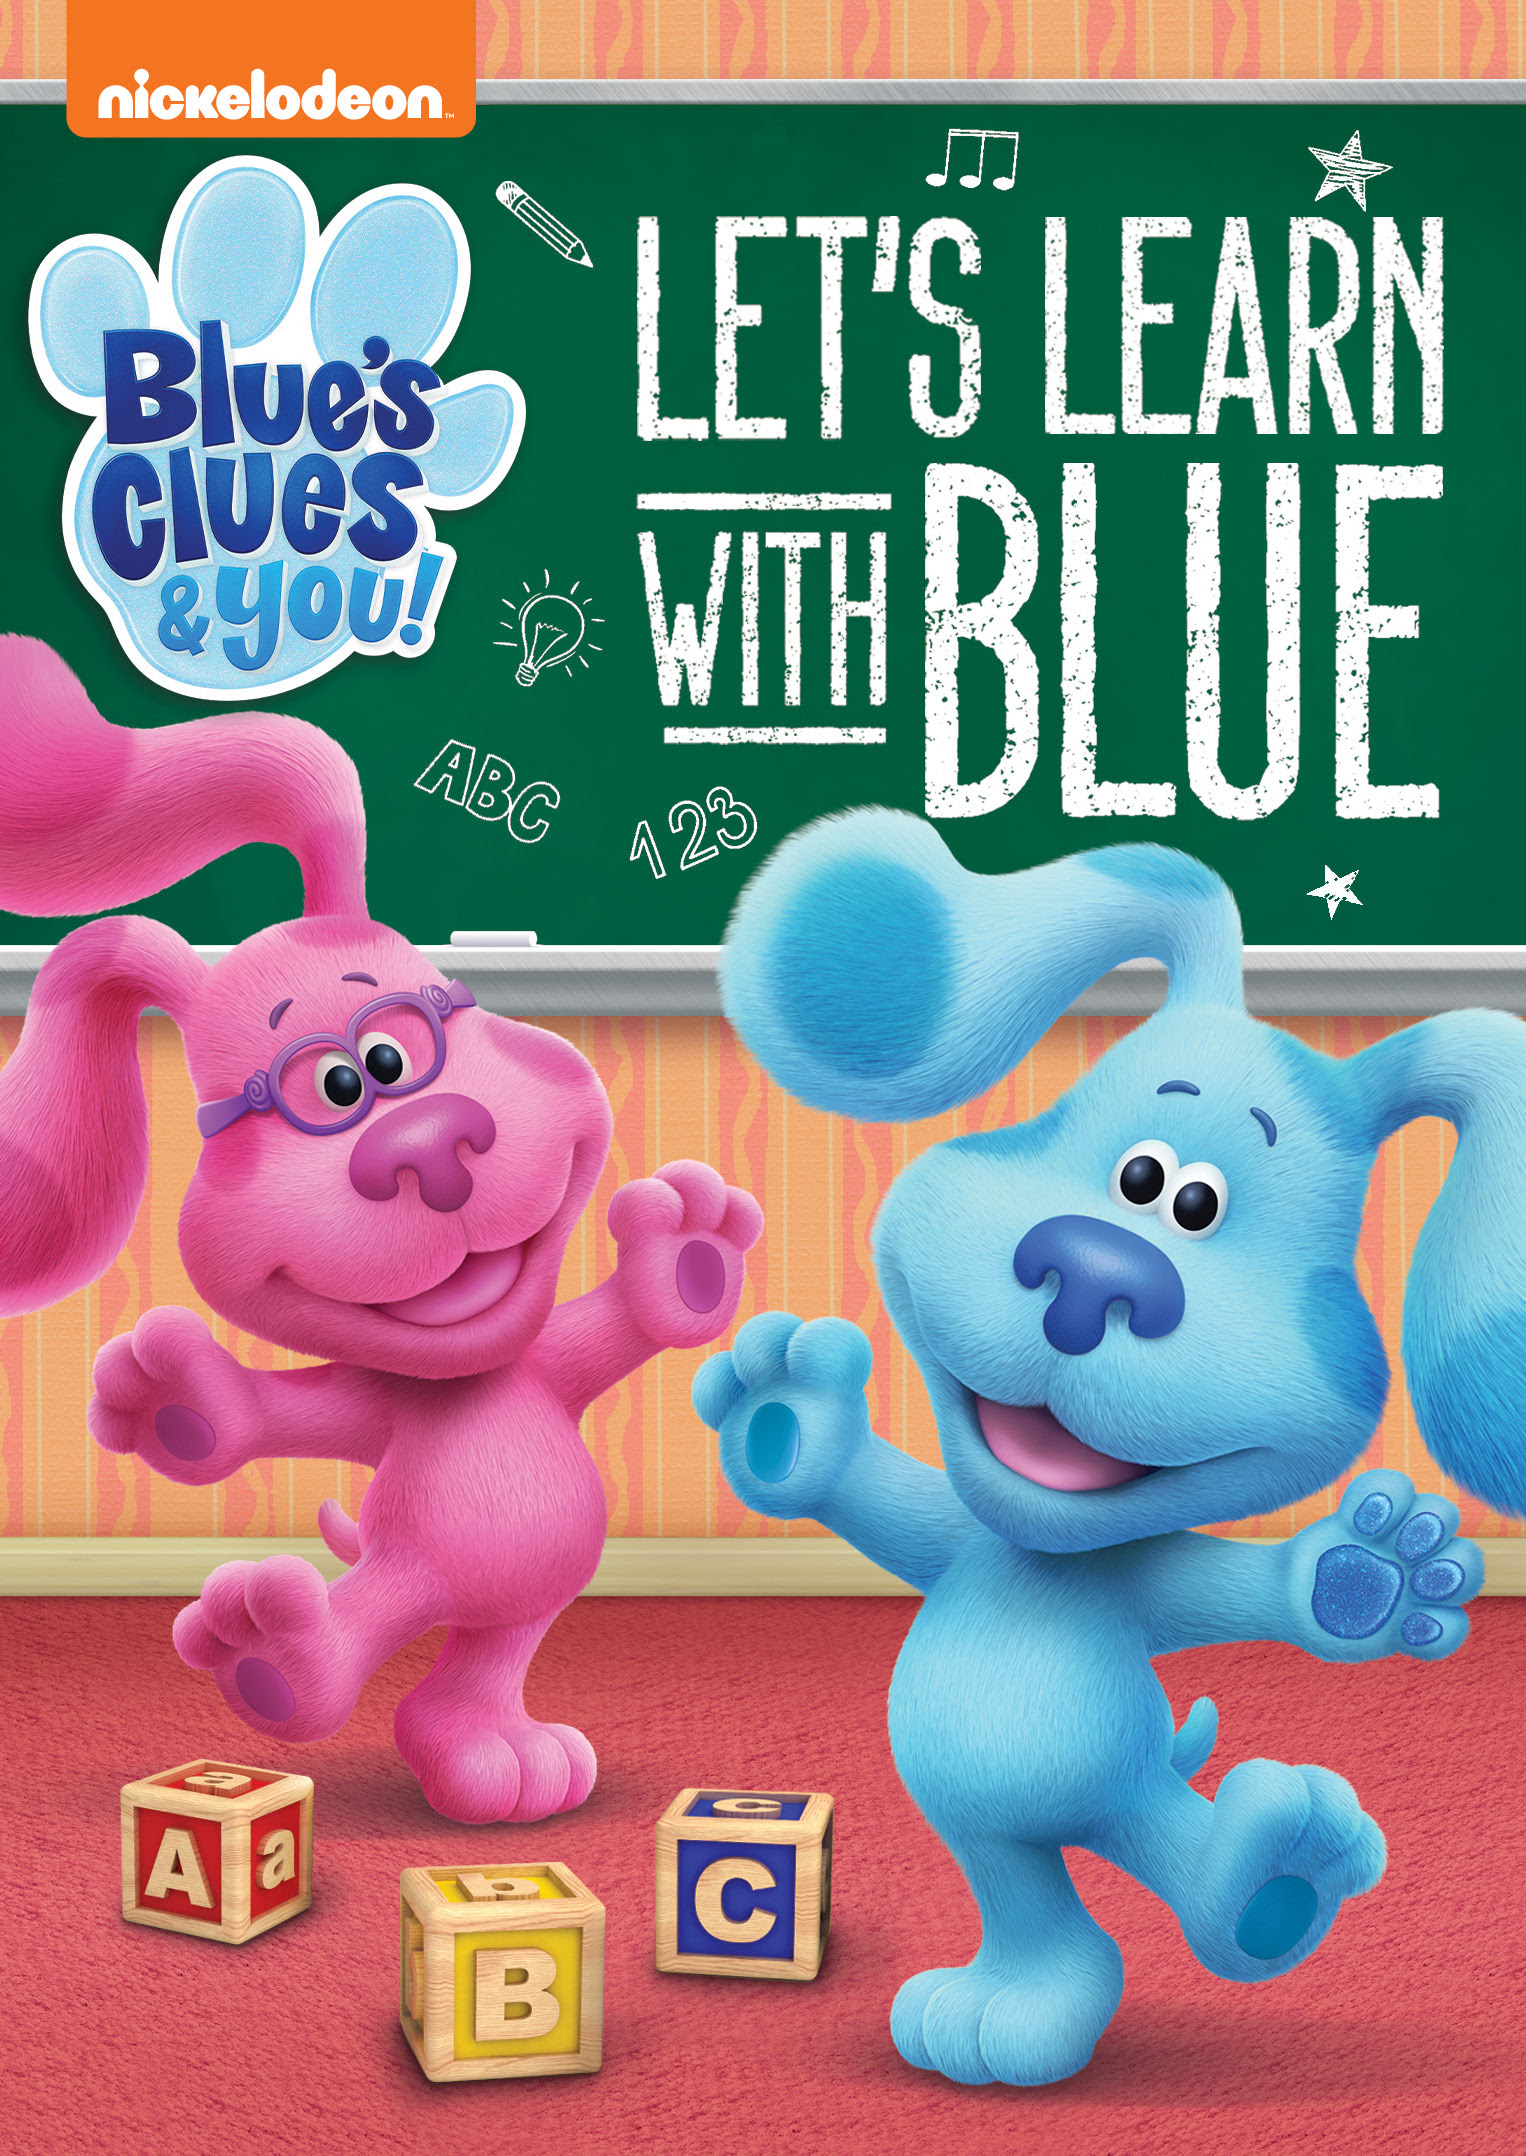 Let’s Learn With Blue: New from Blue’s Clues & You!